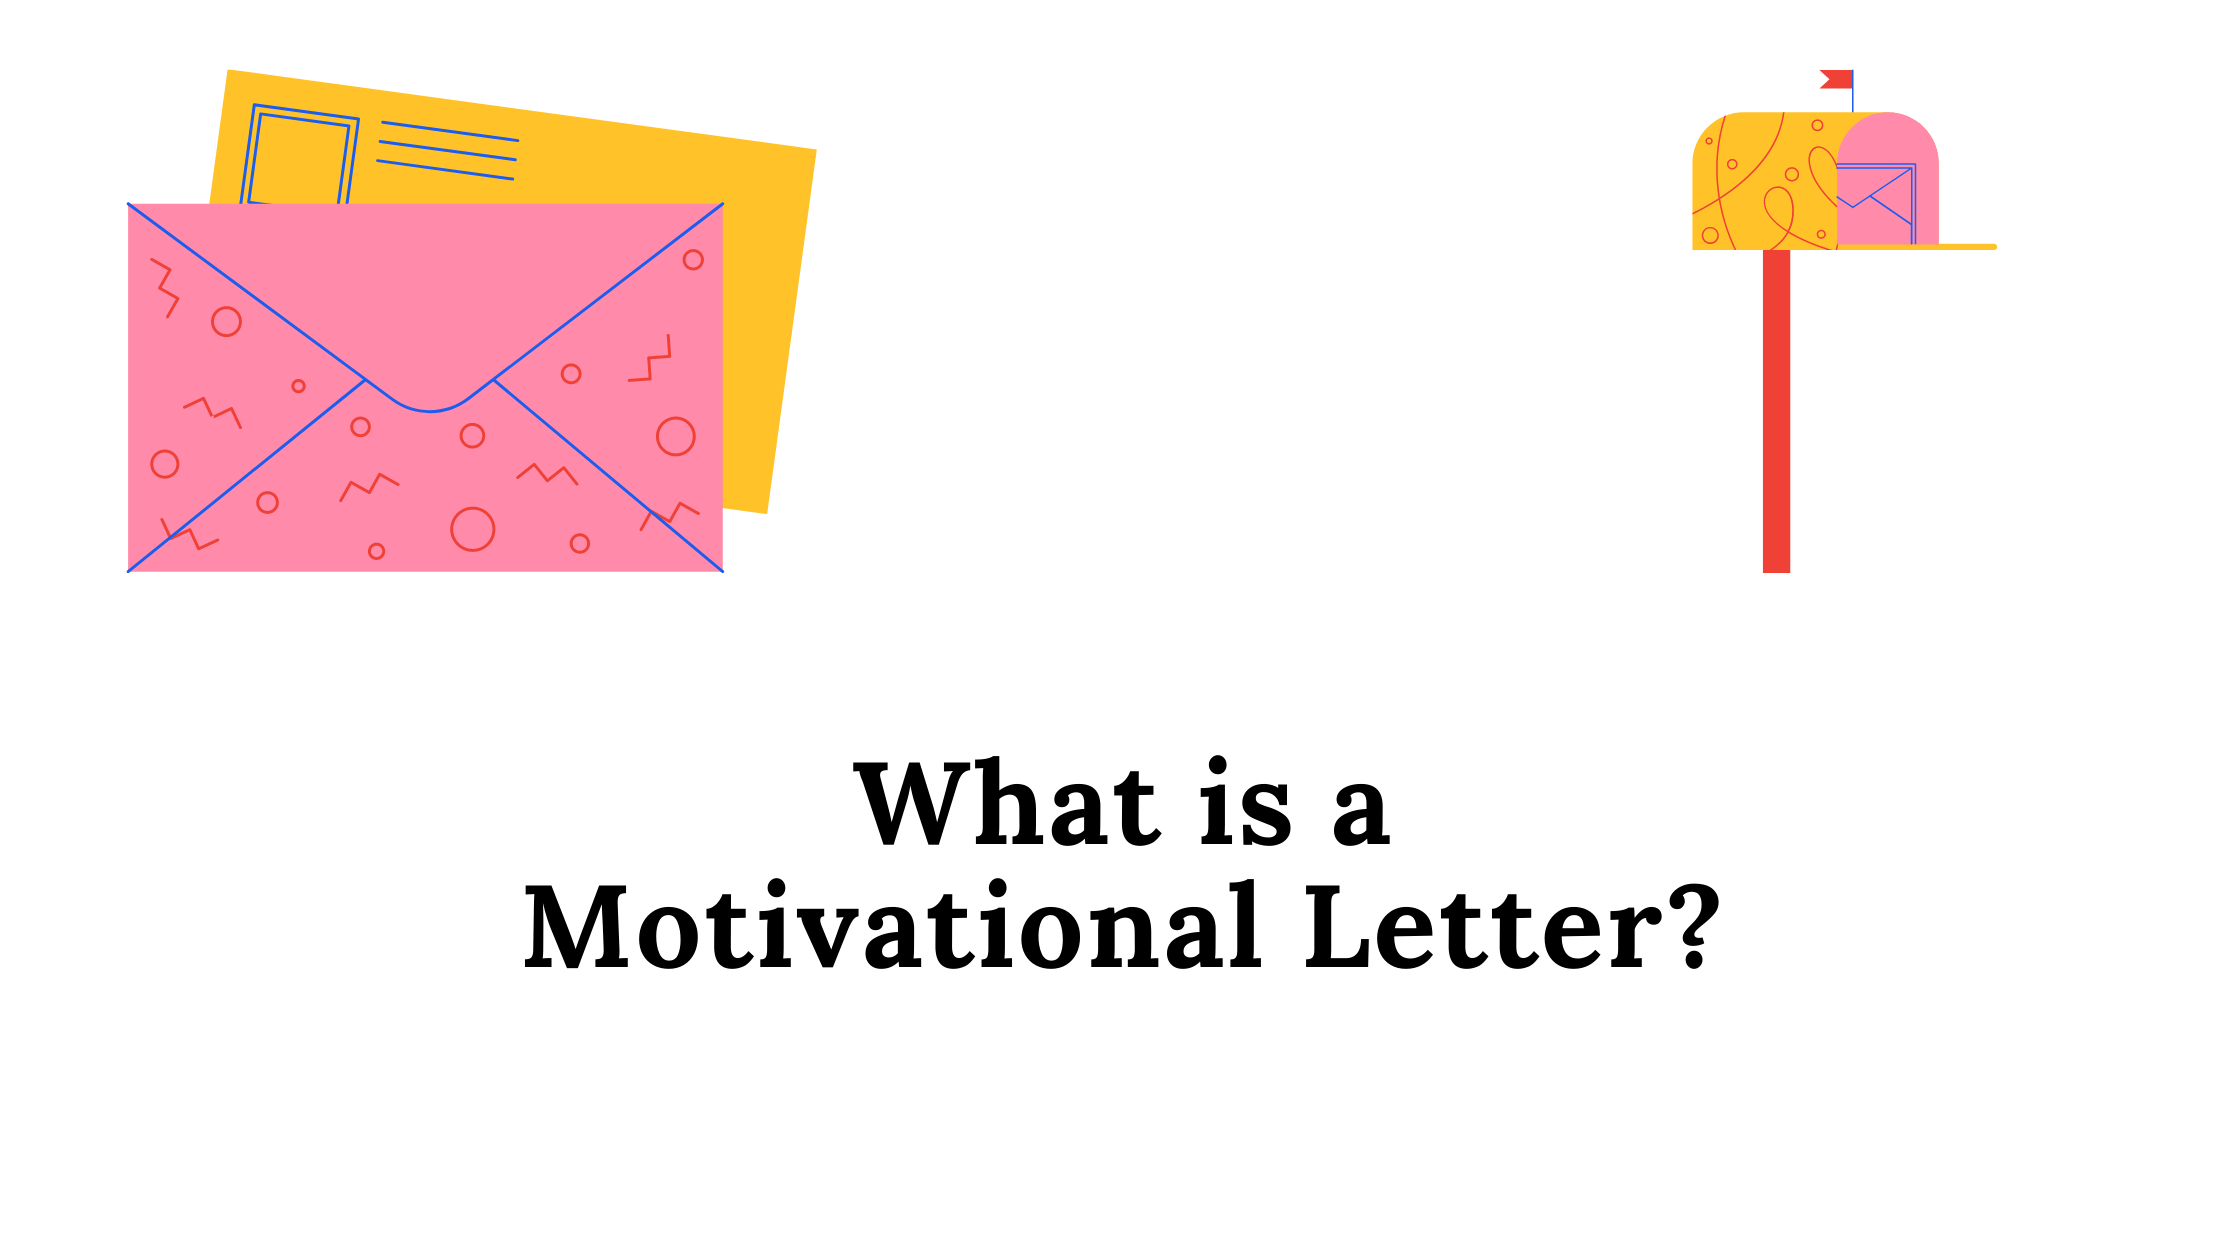 What is a Motivational Letter?